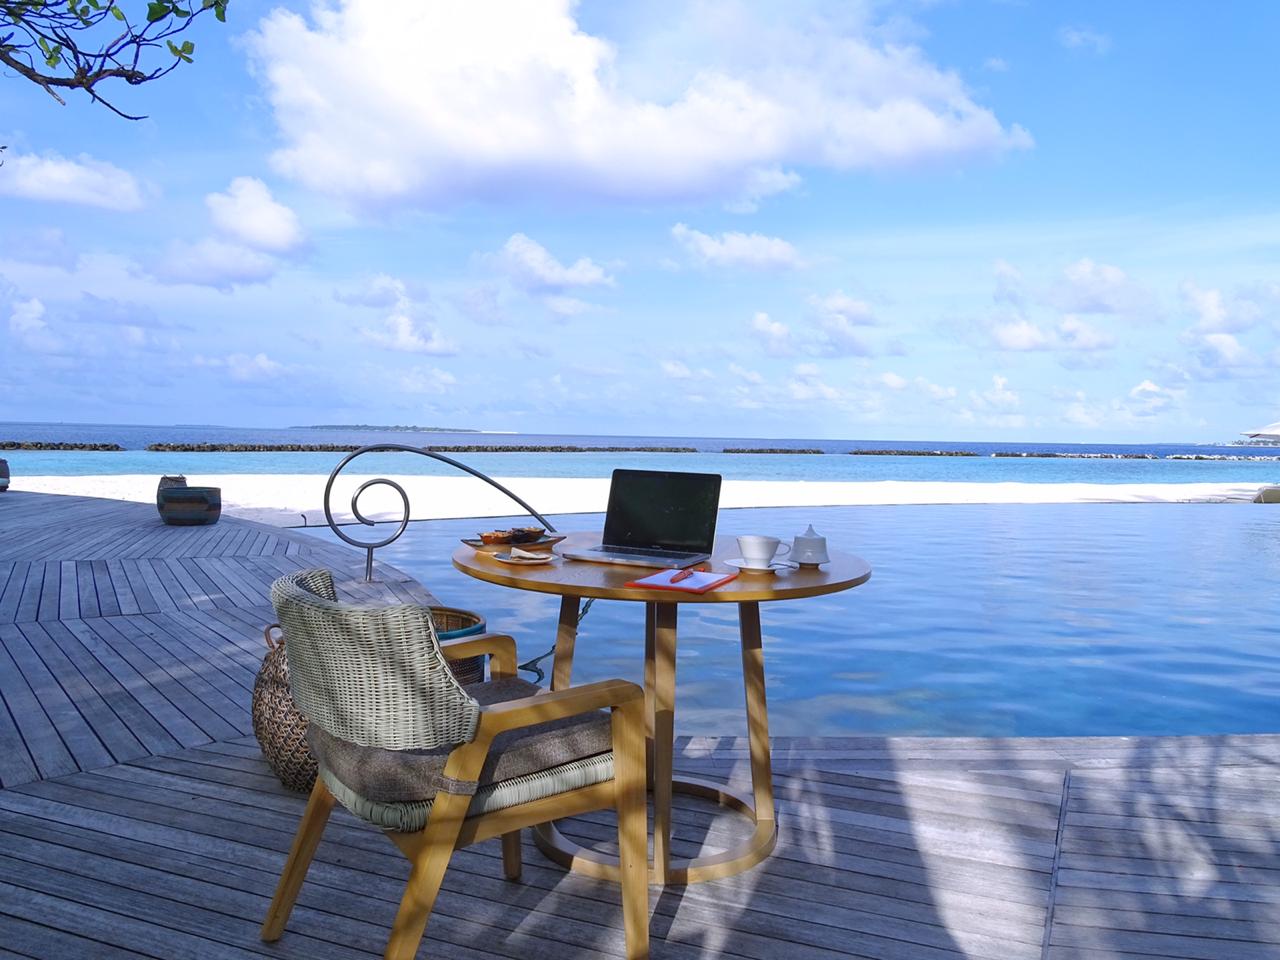 Workation Package at The Nautilus (c) The Nautilus Maldives